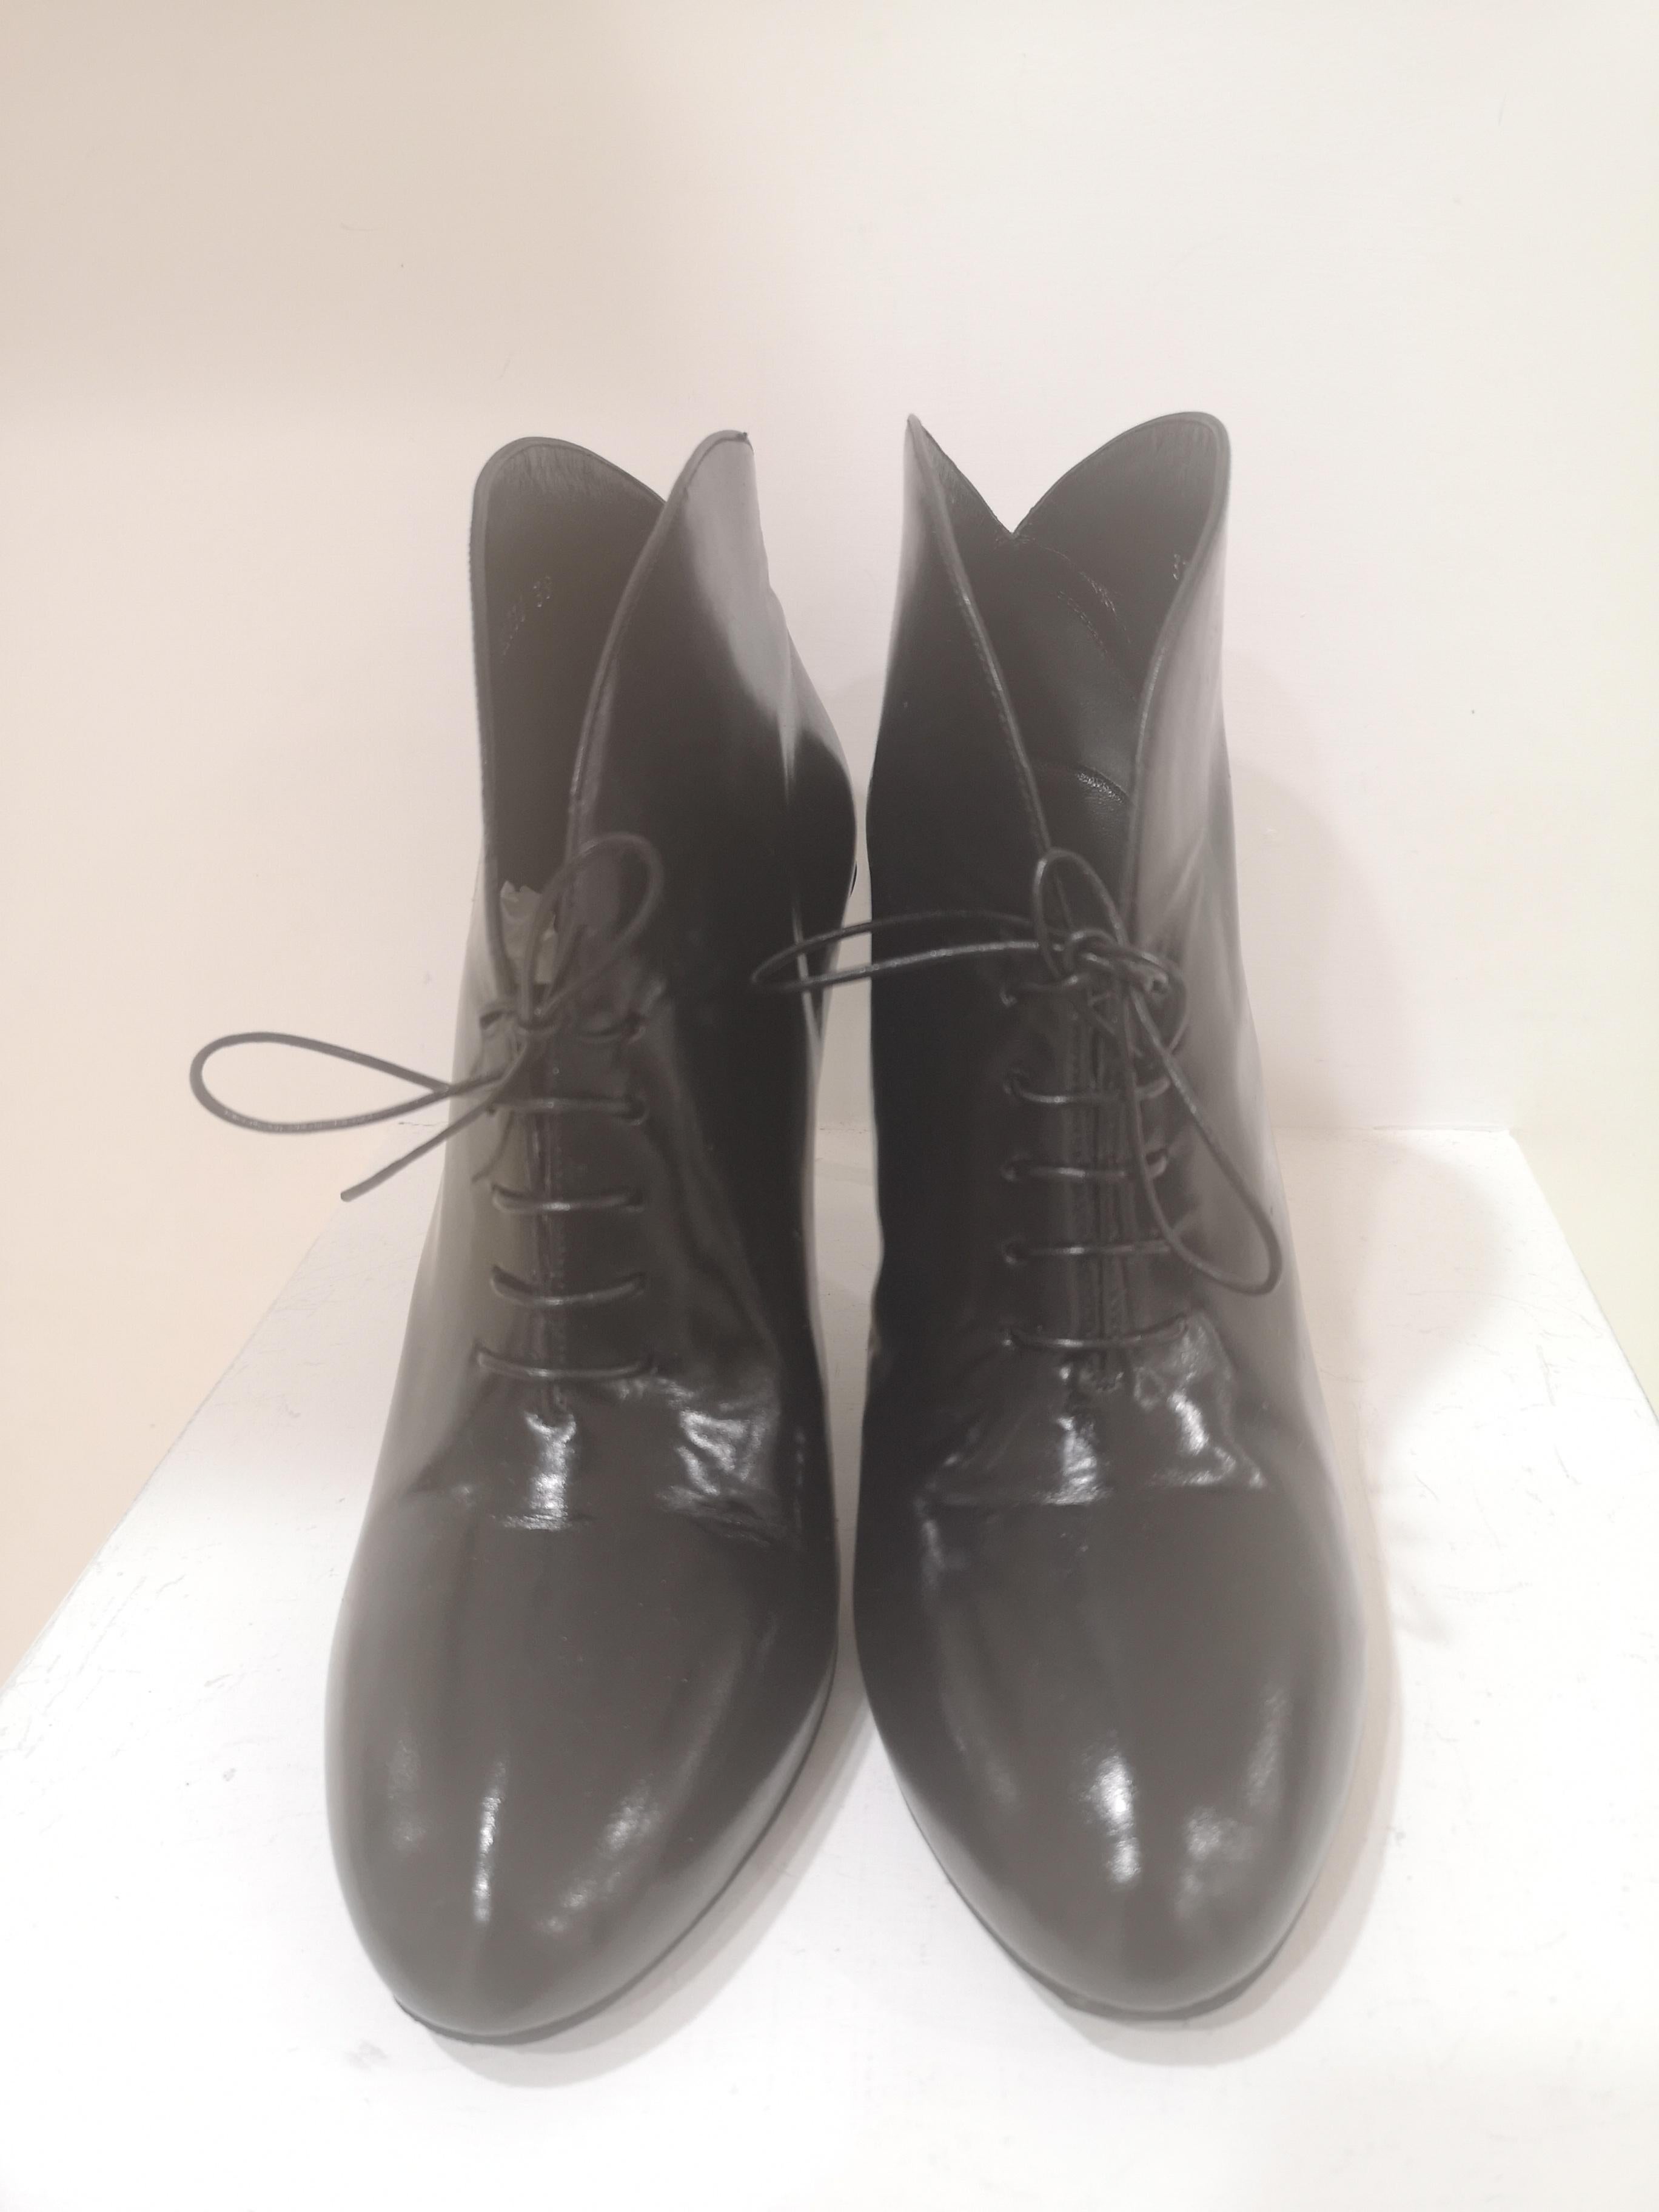 Gucci Black shoes 
made in italy size it 39